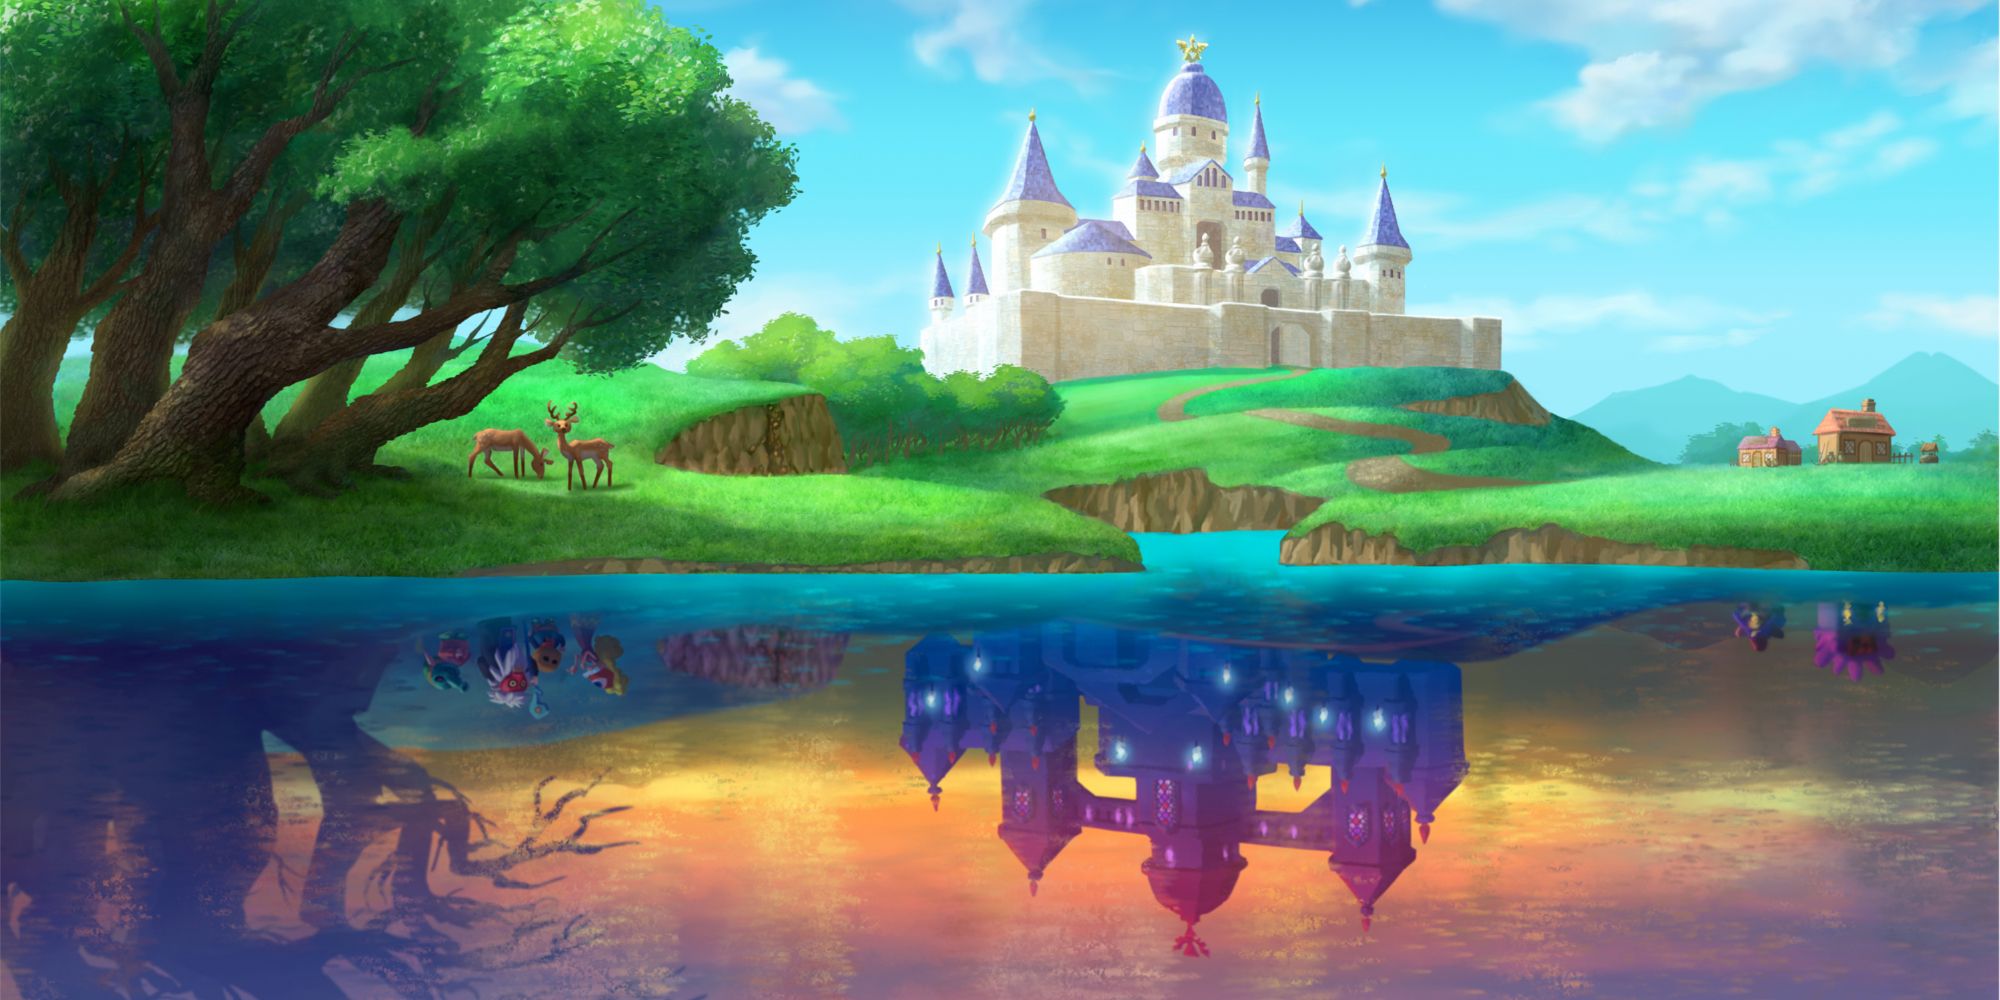 Hyrule Castle is once again a dungeon in A Link Between Worlds